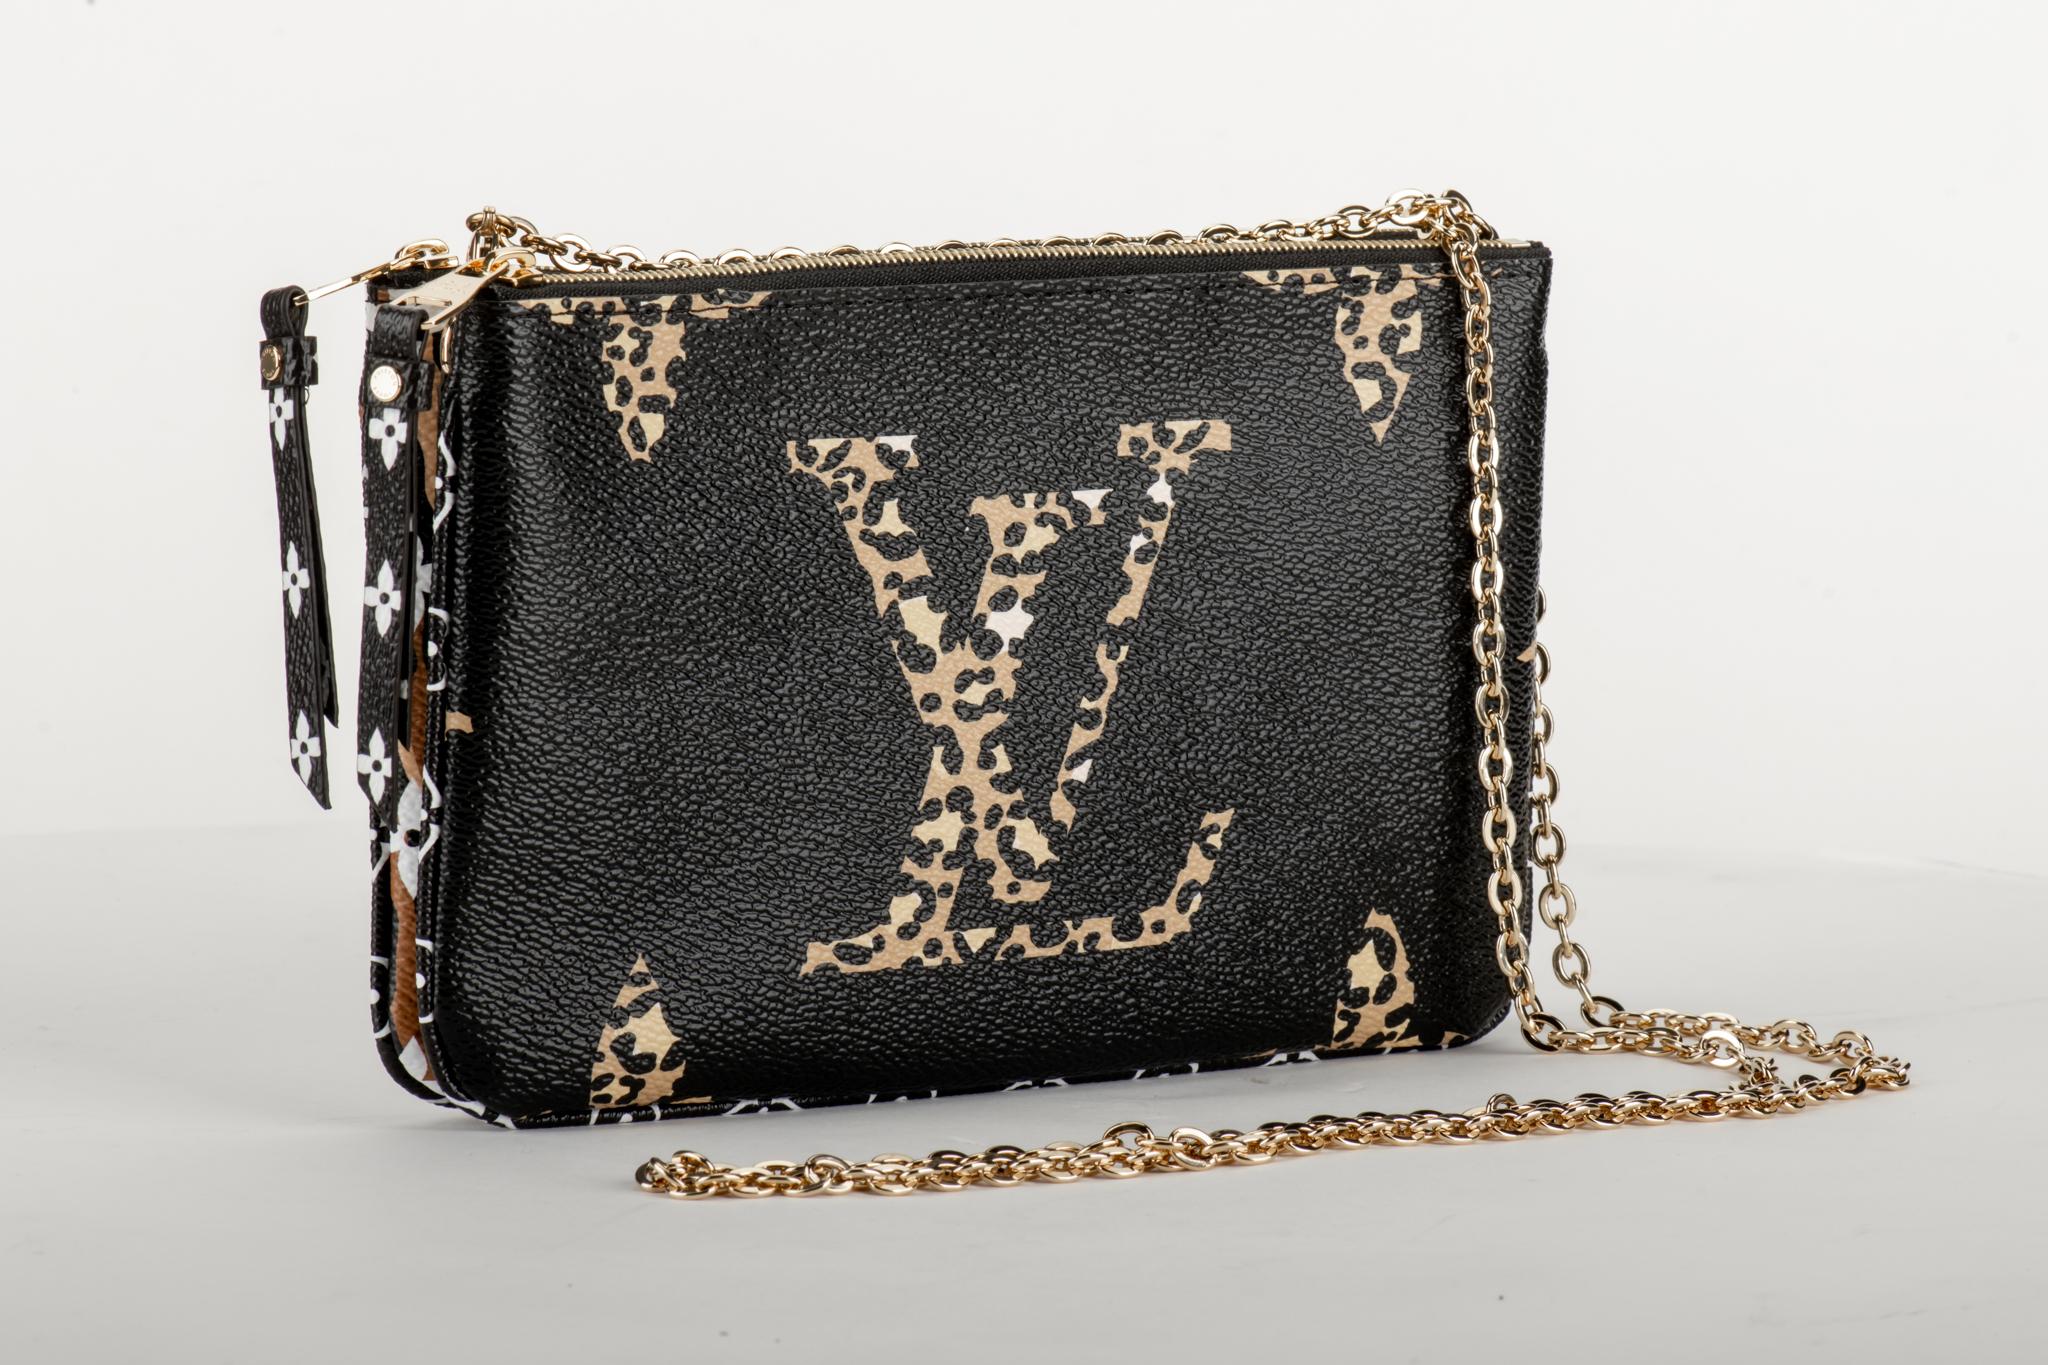 Louis Vuitton limited edition double pouchette in coated monogram canvas with animalier details. Double zipped compartments with middle open pocket, can be used as a pouchette or as a crossbody. Comes with original dust cover and box. Never worn.